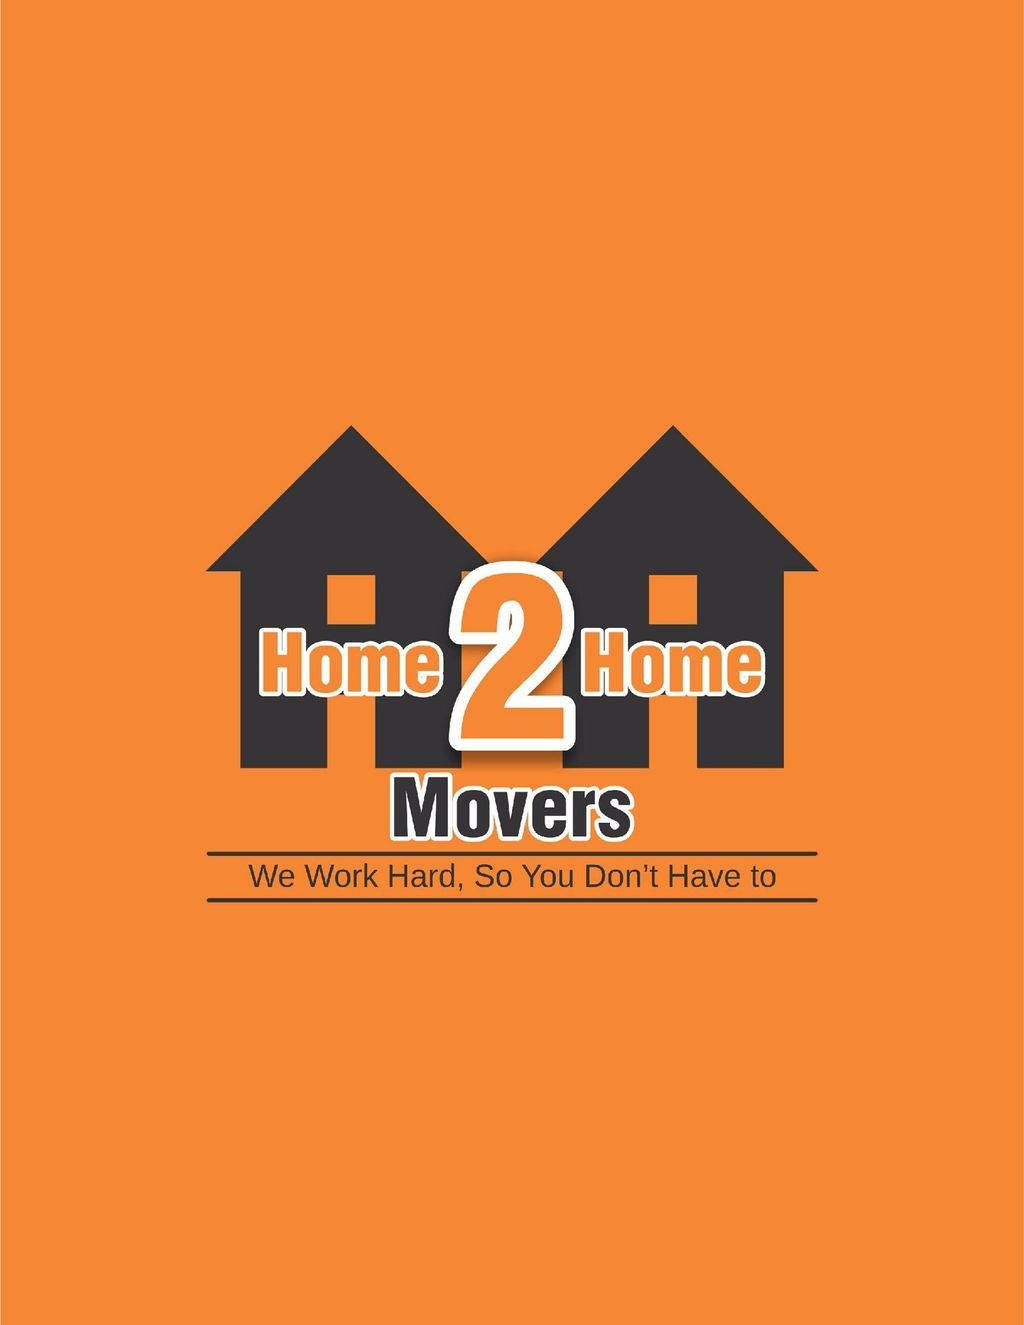 Home2home movers